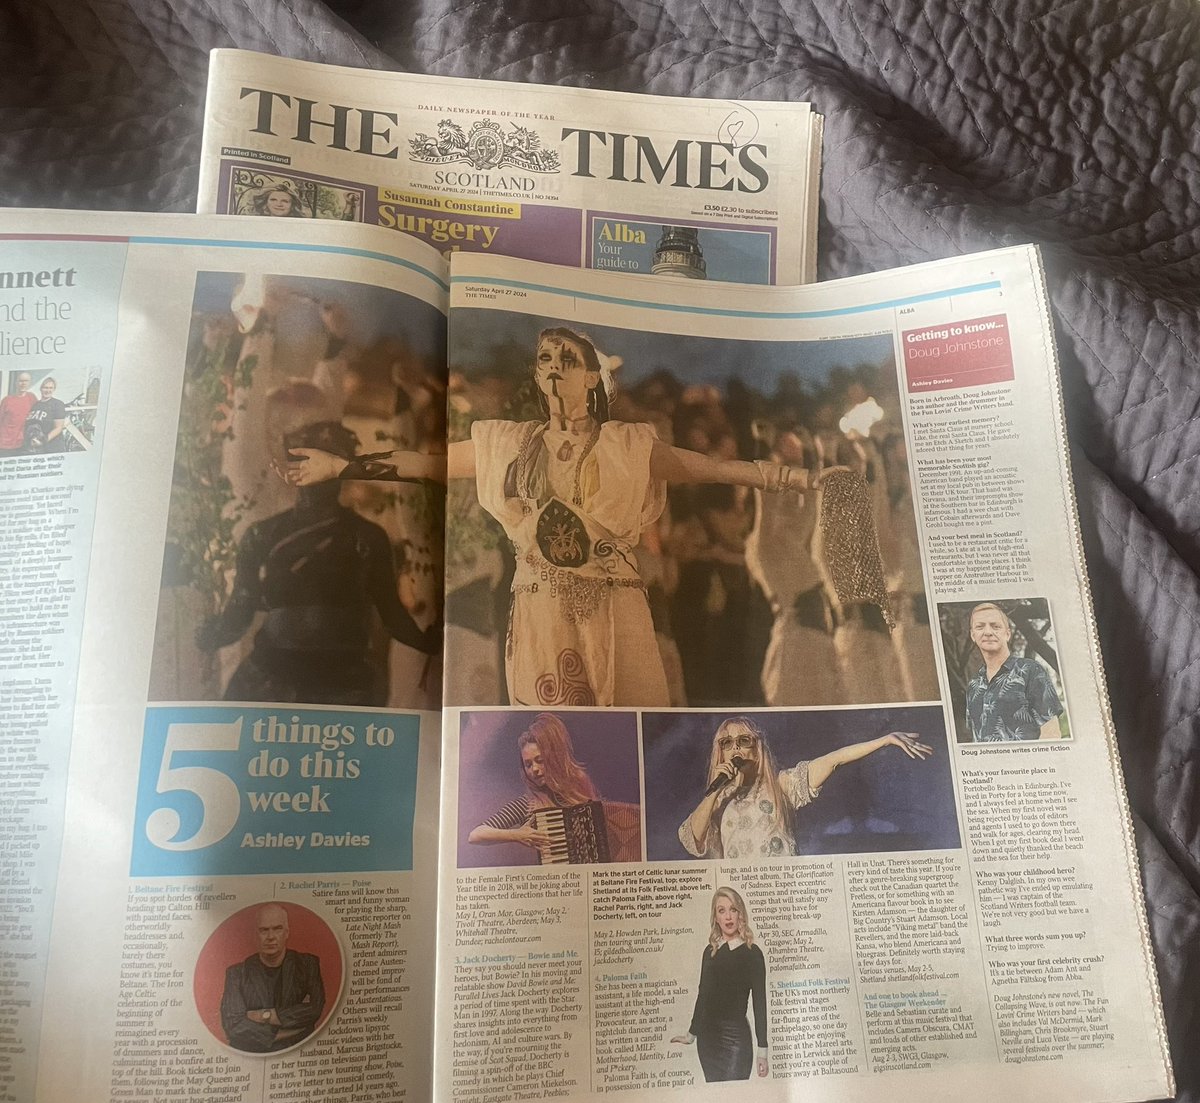 Buy today’s @timesscotland (Alba section) for tips on fun things to do in Scotland next week: Beltane Fire Festival @rachelparris on tour @mrjackdocherty on tour with Bowie and Me @Palomafaith on tour @shetlandfolk @doug_johnstone thetimes.co.uk/article/five-t…